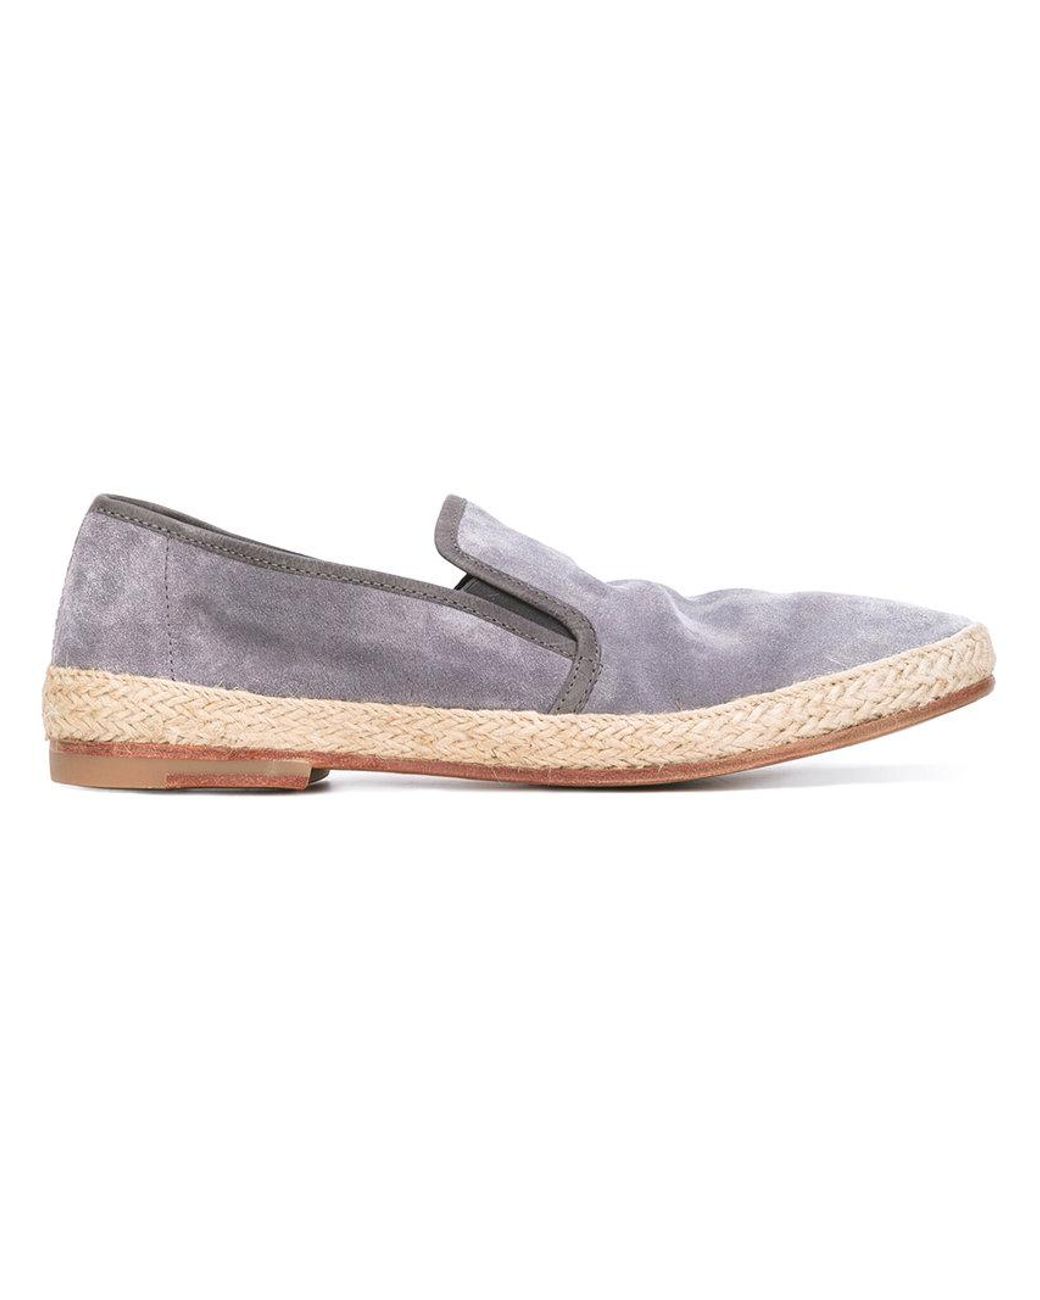 N.d.c. Made By Hand Pablo Espadrilles in Gray for Men | Lyst